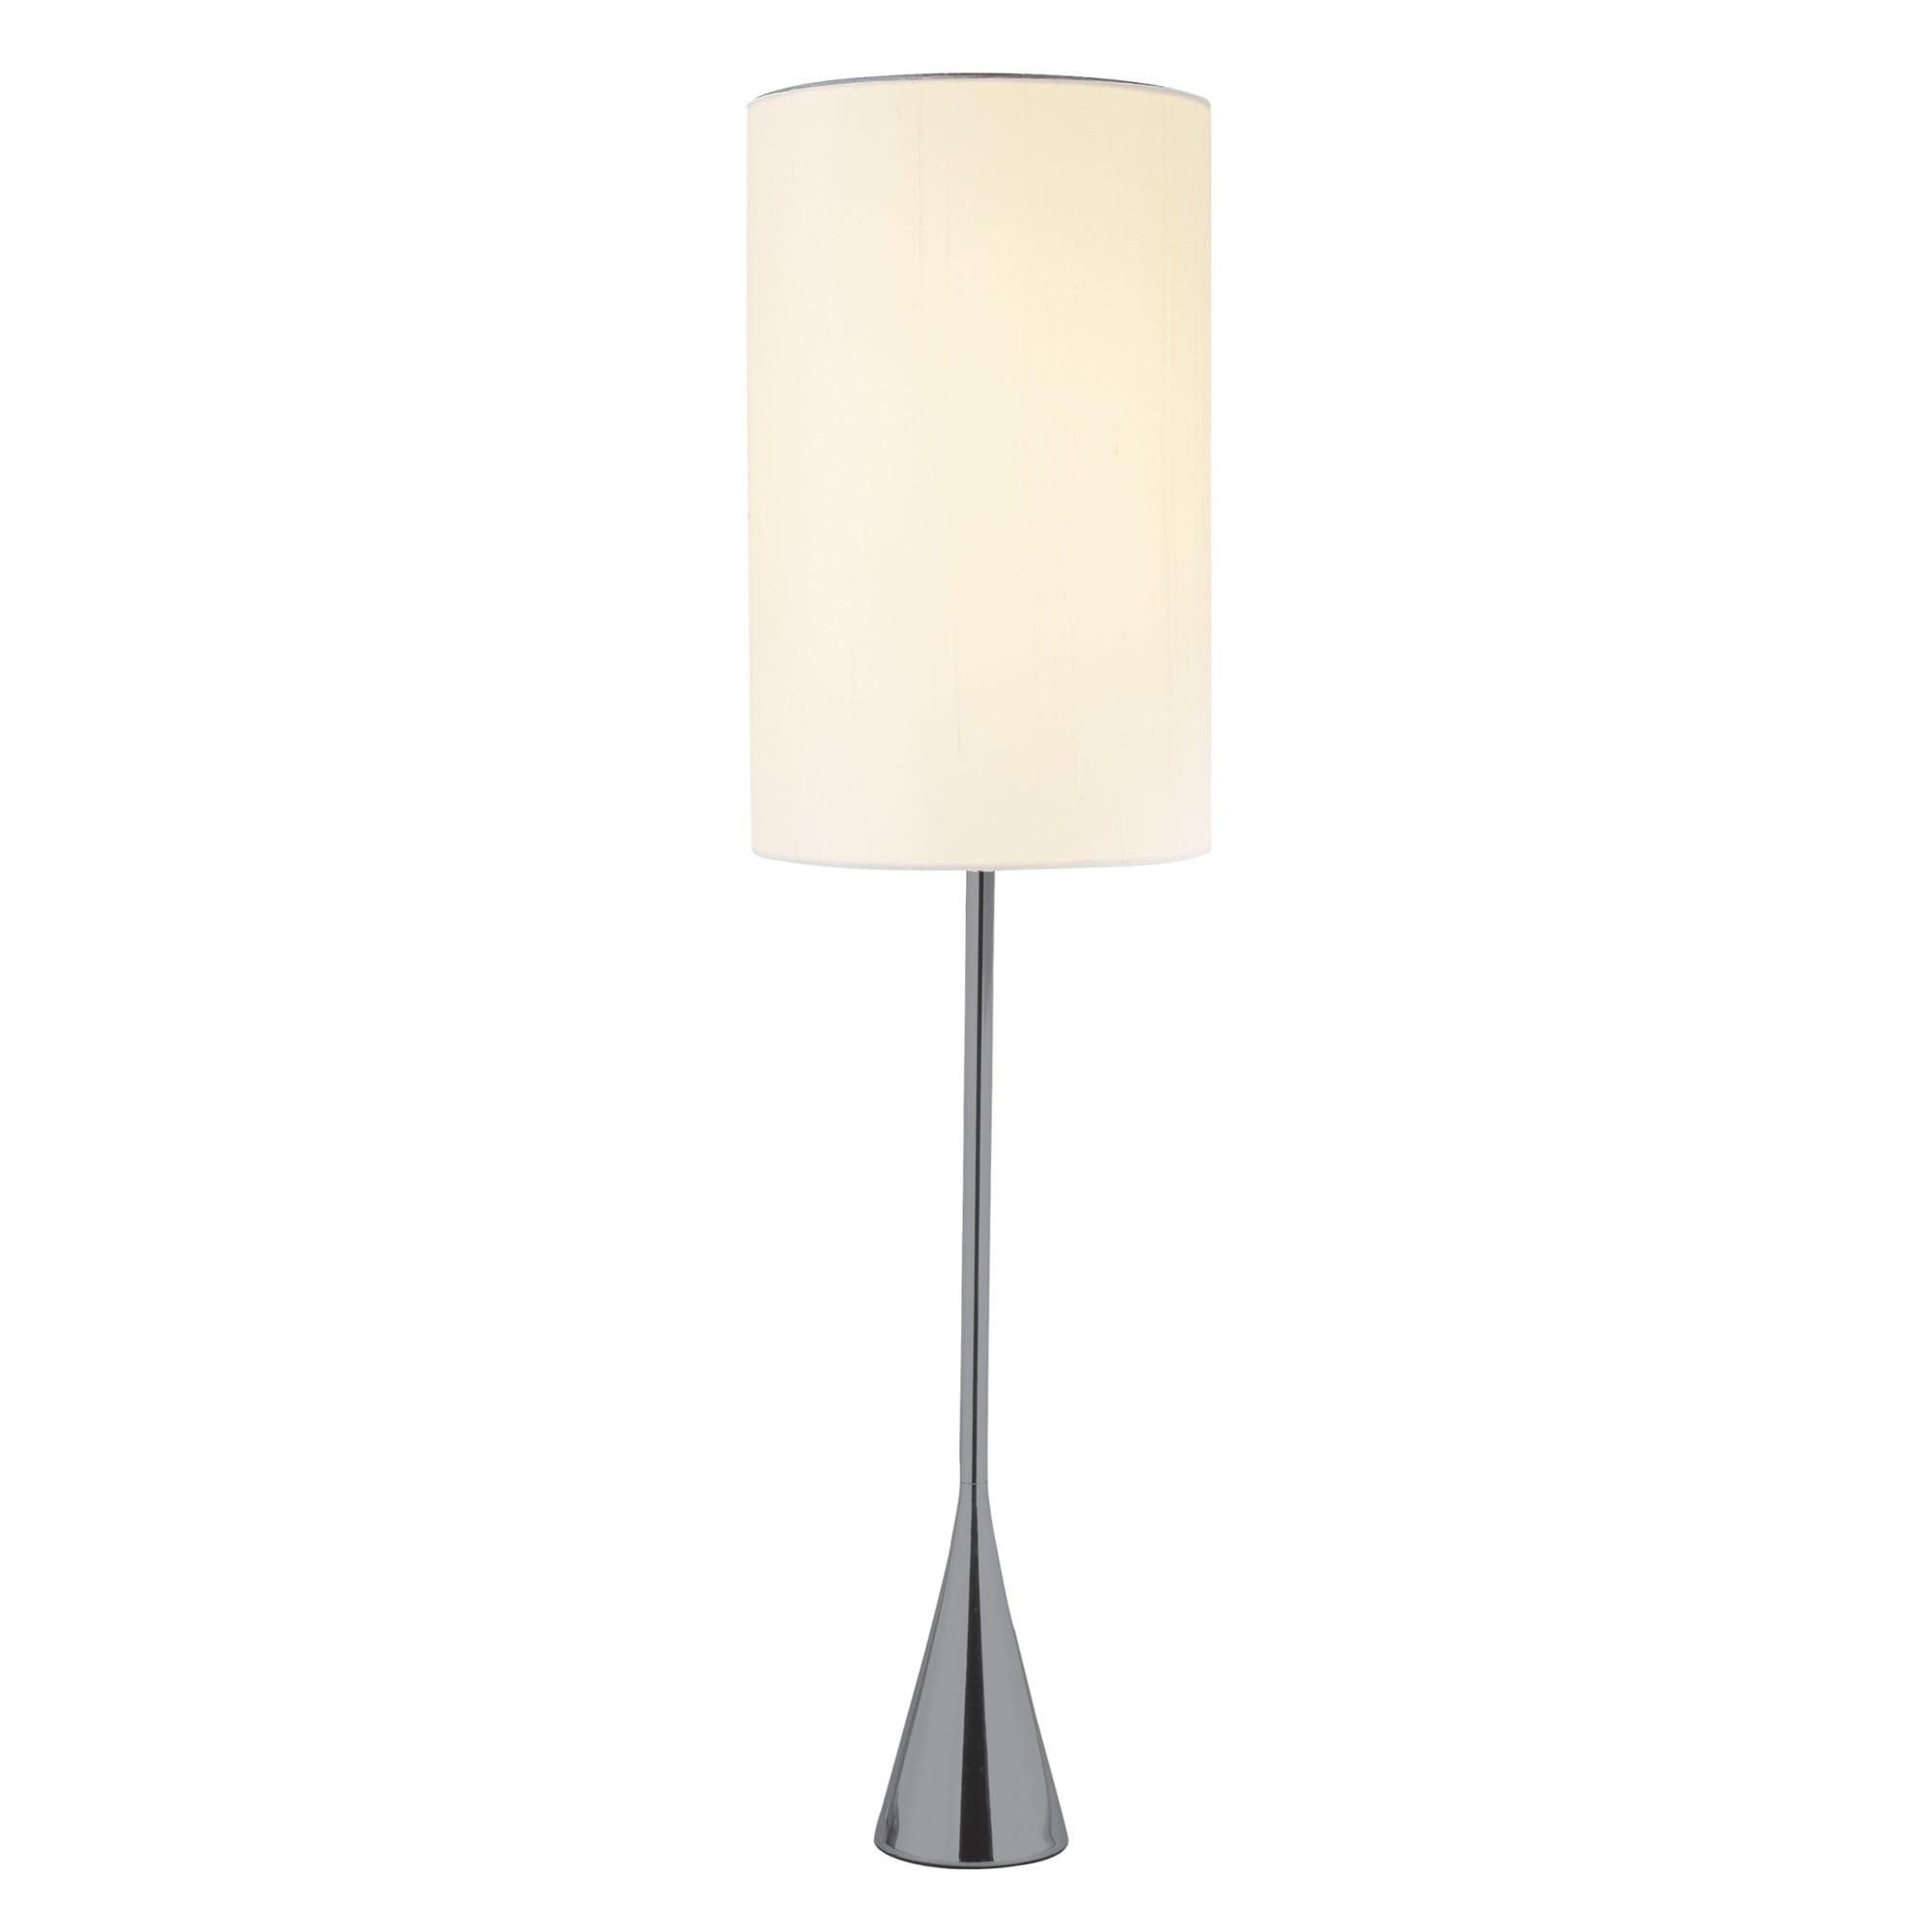 Black Nickel Finish Metal Tall White, Tall Nickel Table Lamp With Black Shade